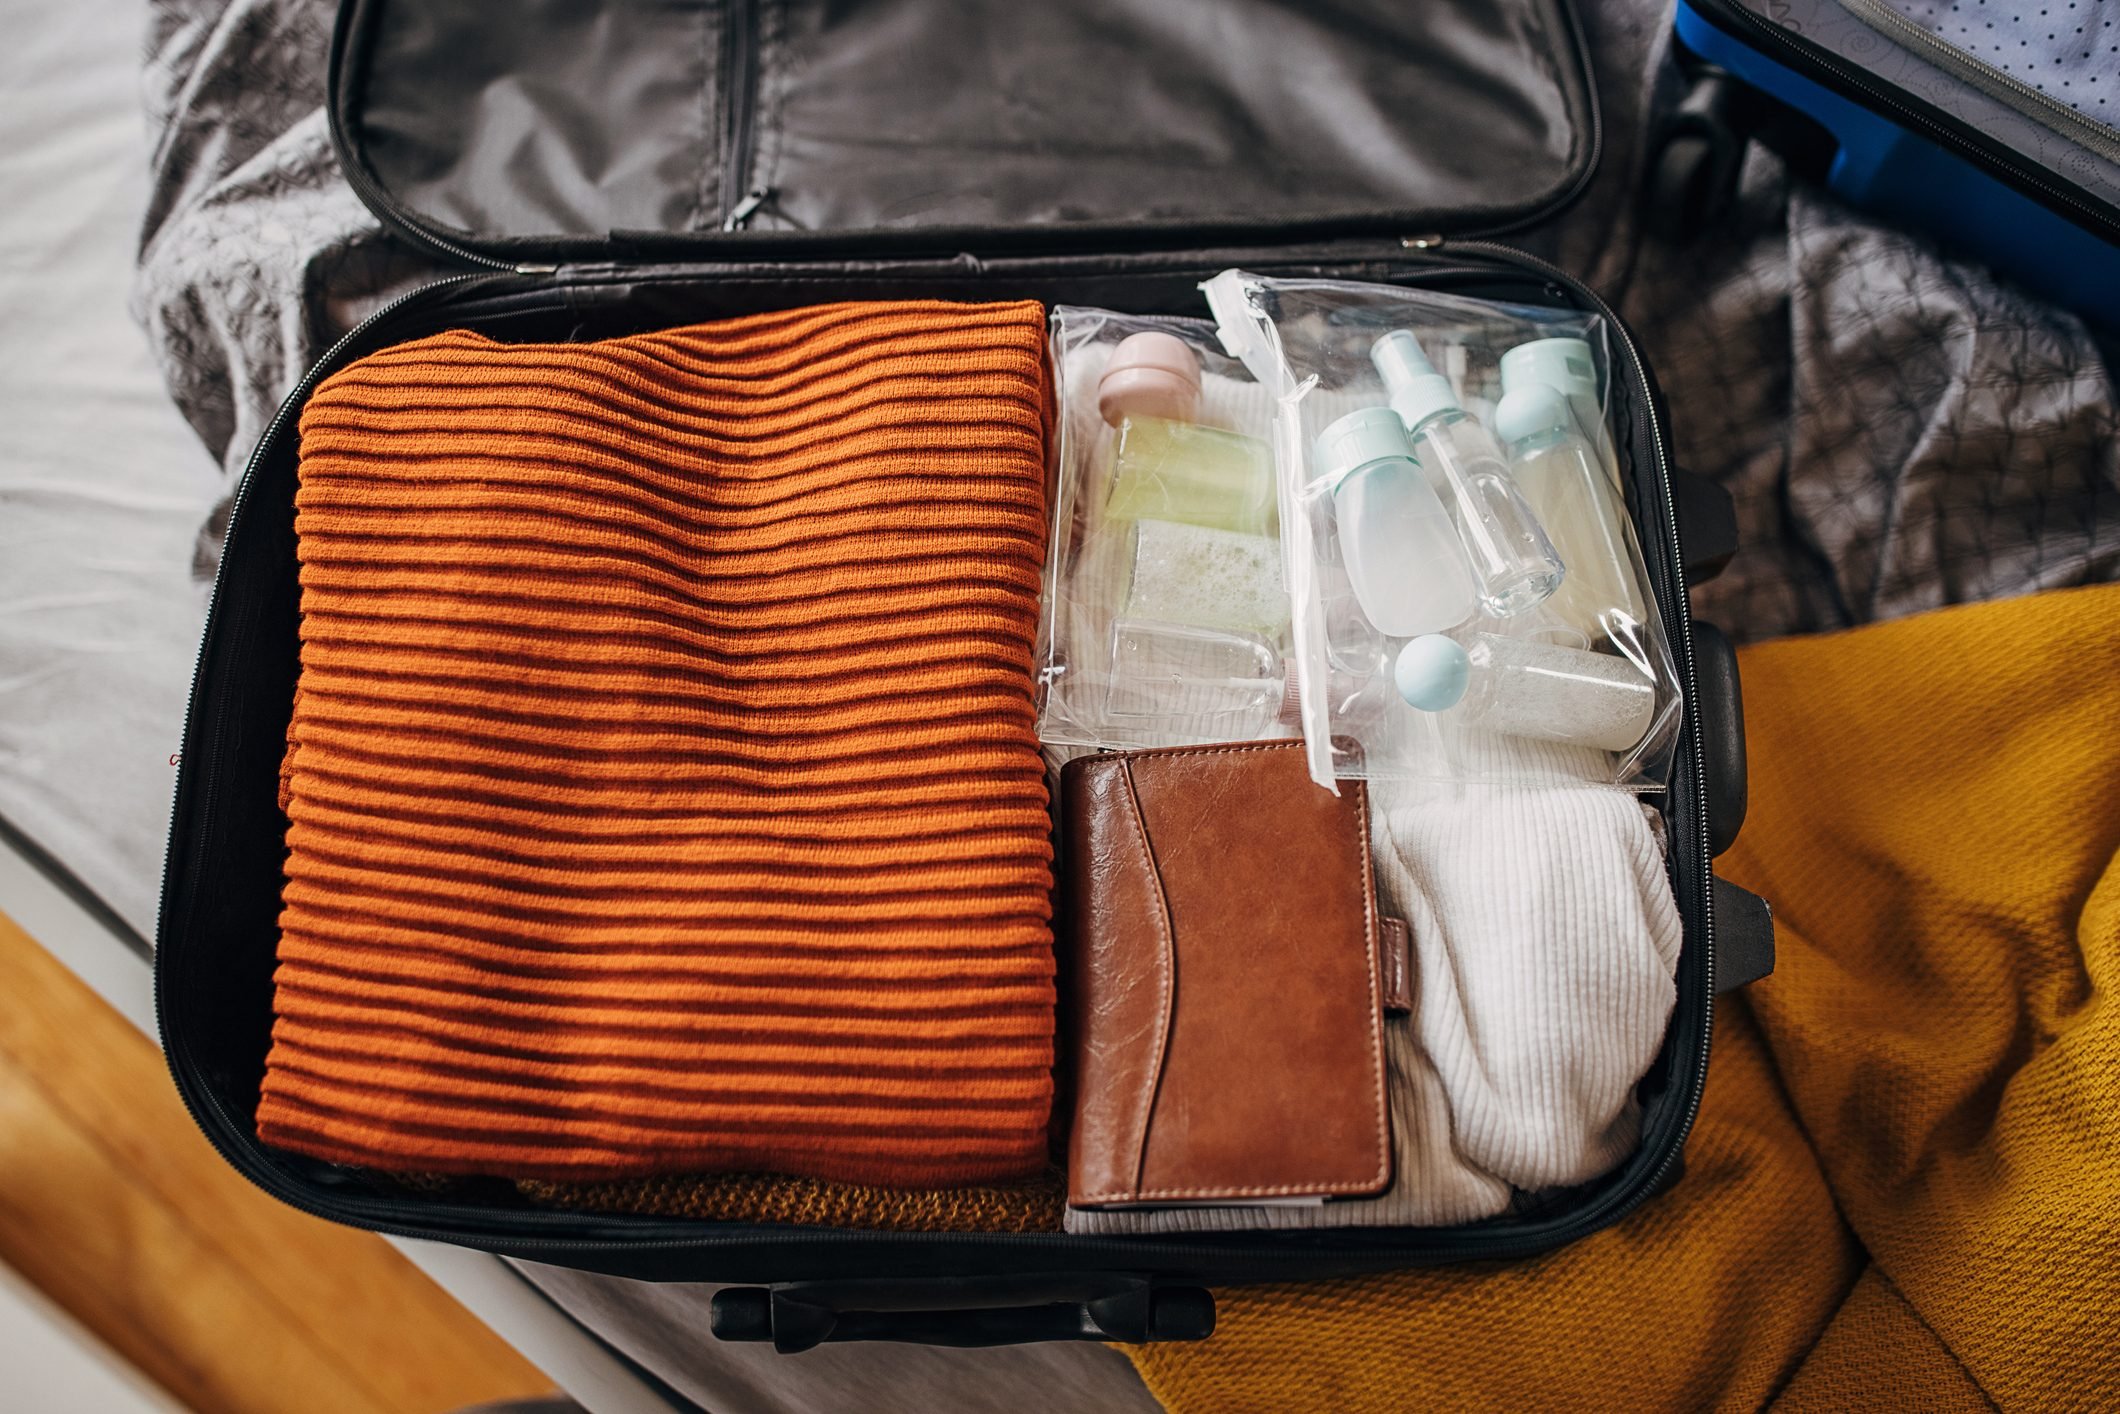 TSA Carry-On Rules: Items You Can and Can't Take on a Flight in